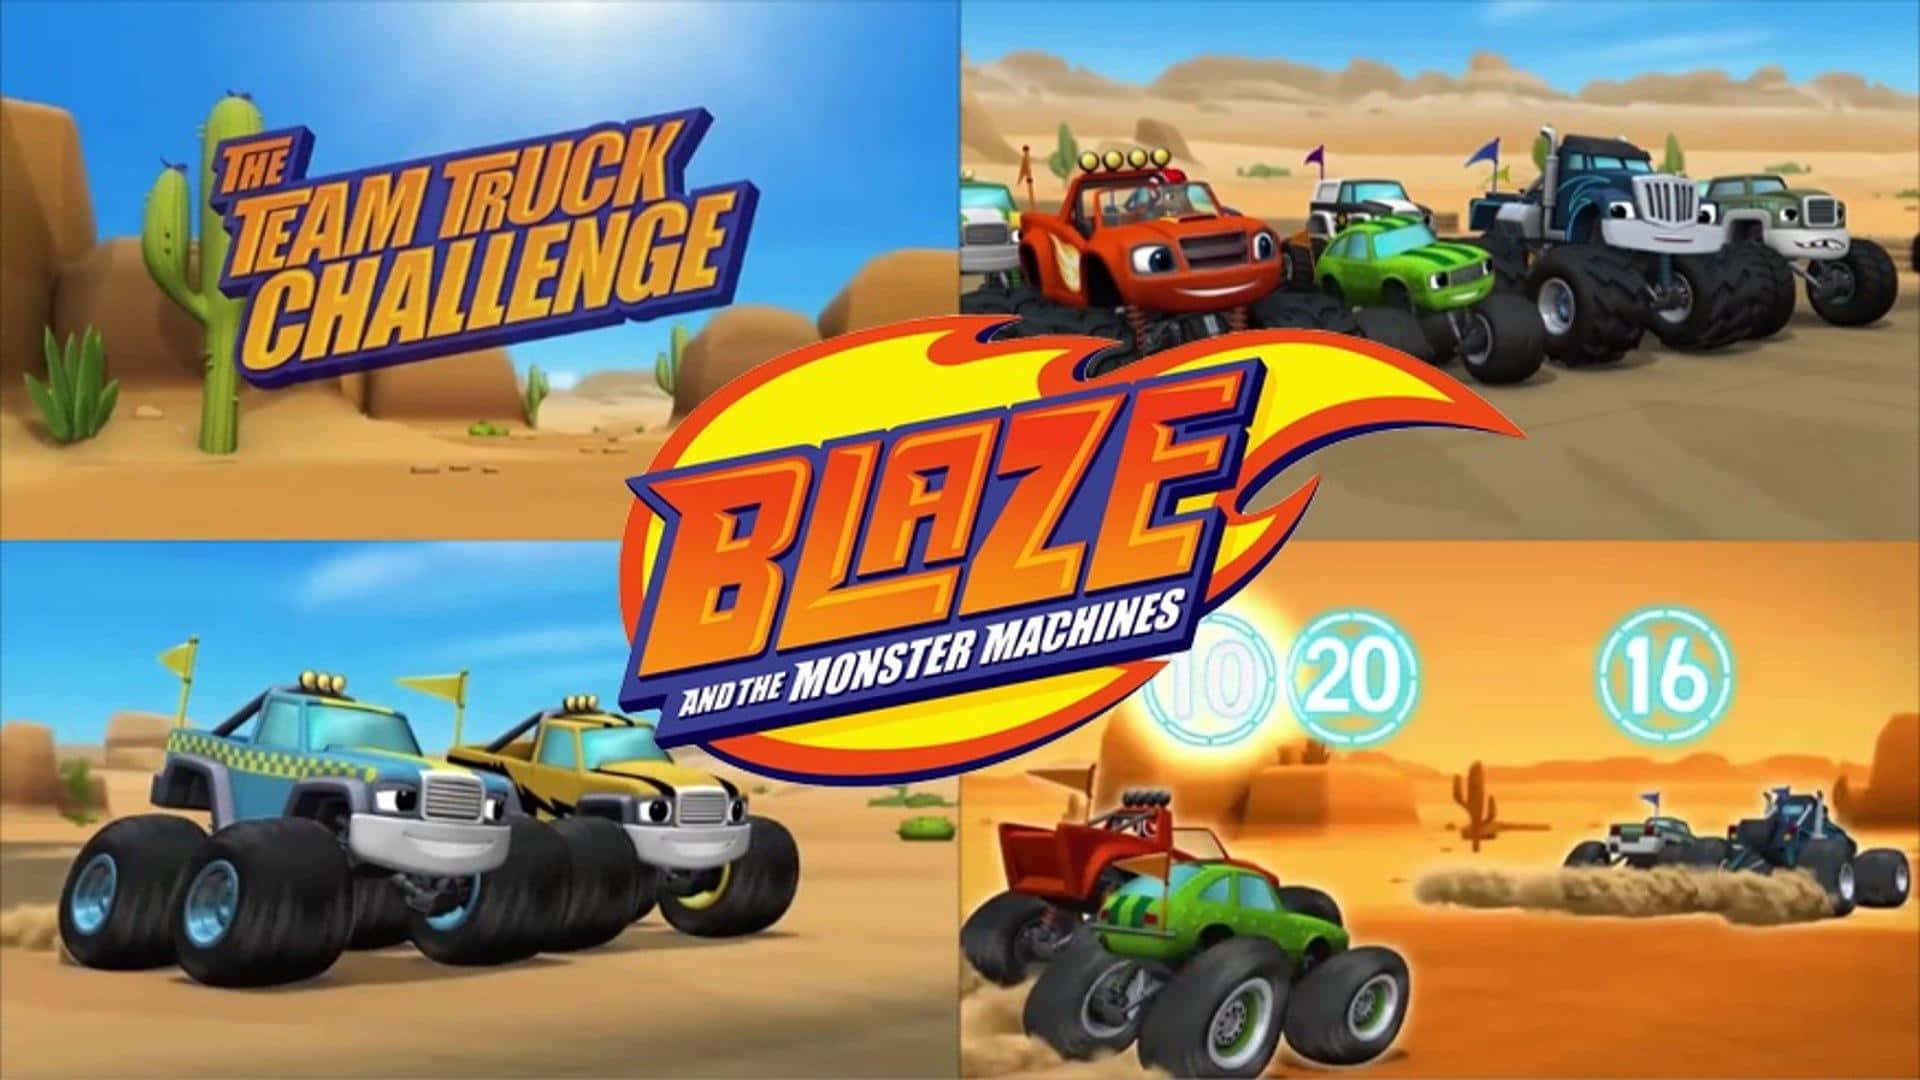 Blaze The Monster Machine is Clocking Super Fast Speeds in This Race!